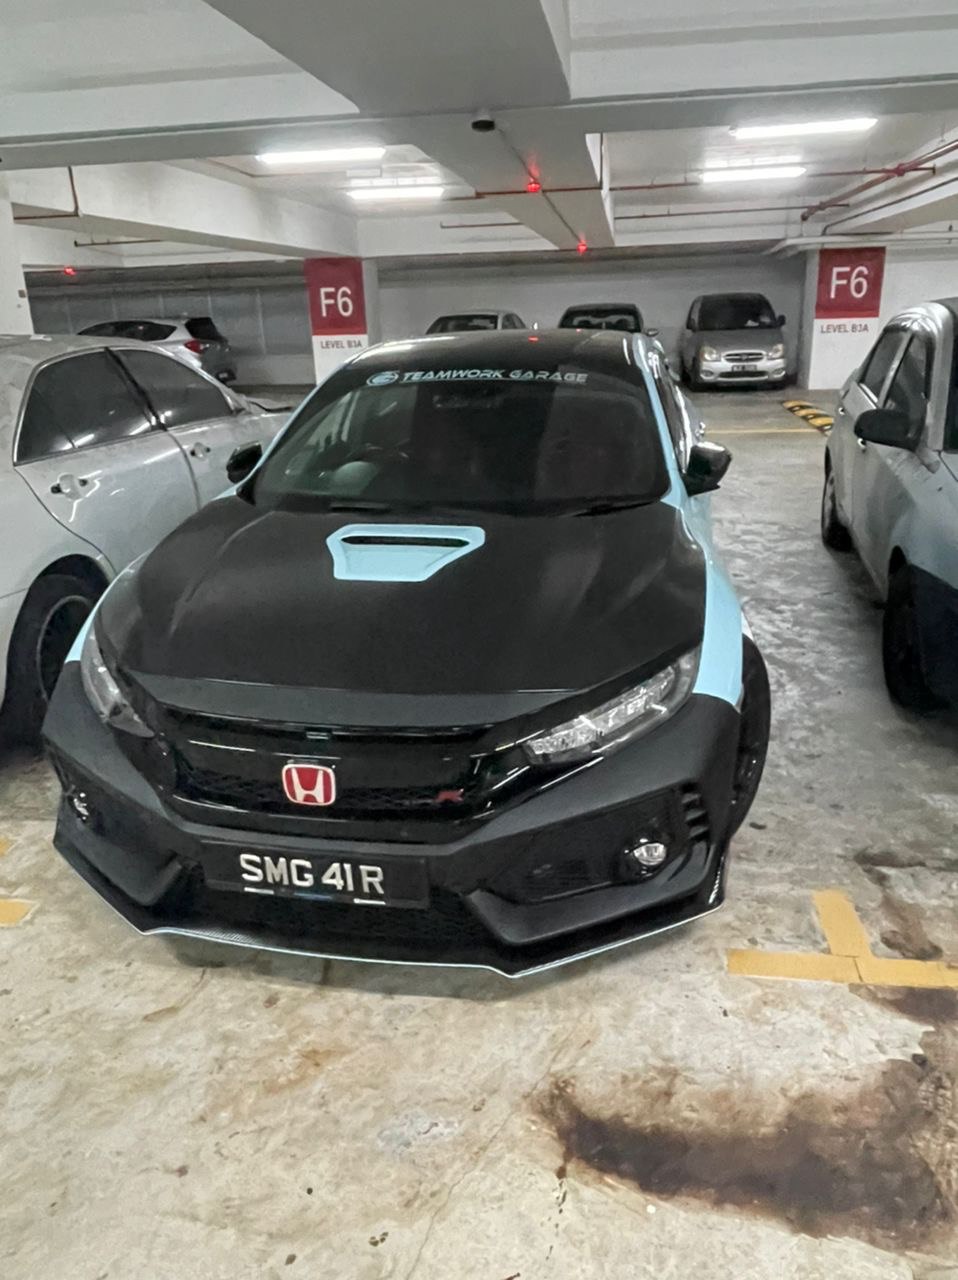 A Singaporean man's Honda Civic Type R sportscar was stolen from a parking lot in Genting Highlands. Image credit: Mothership.sg